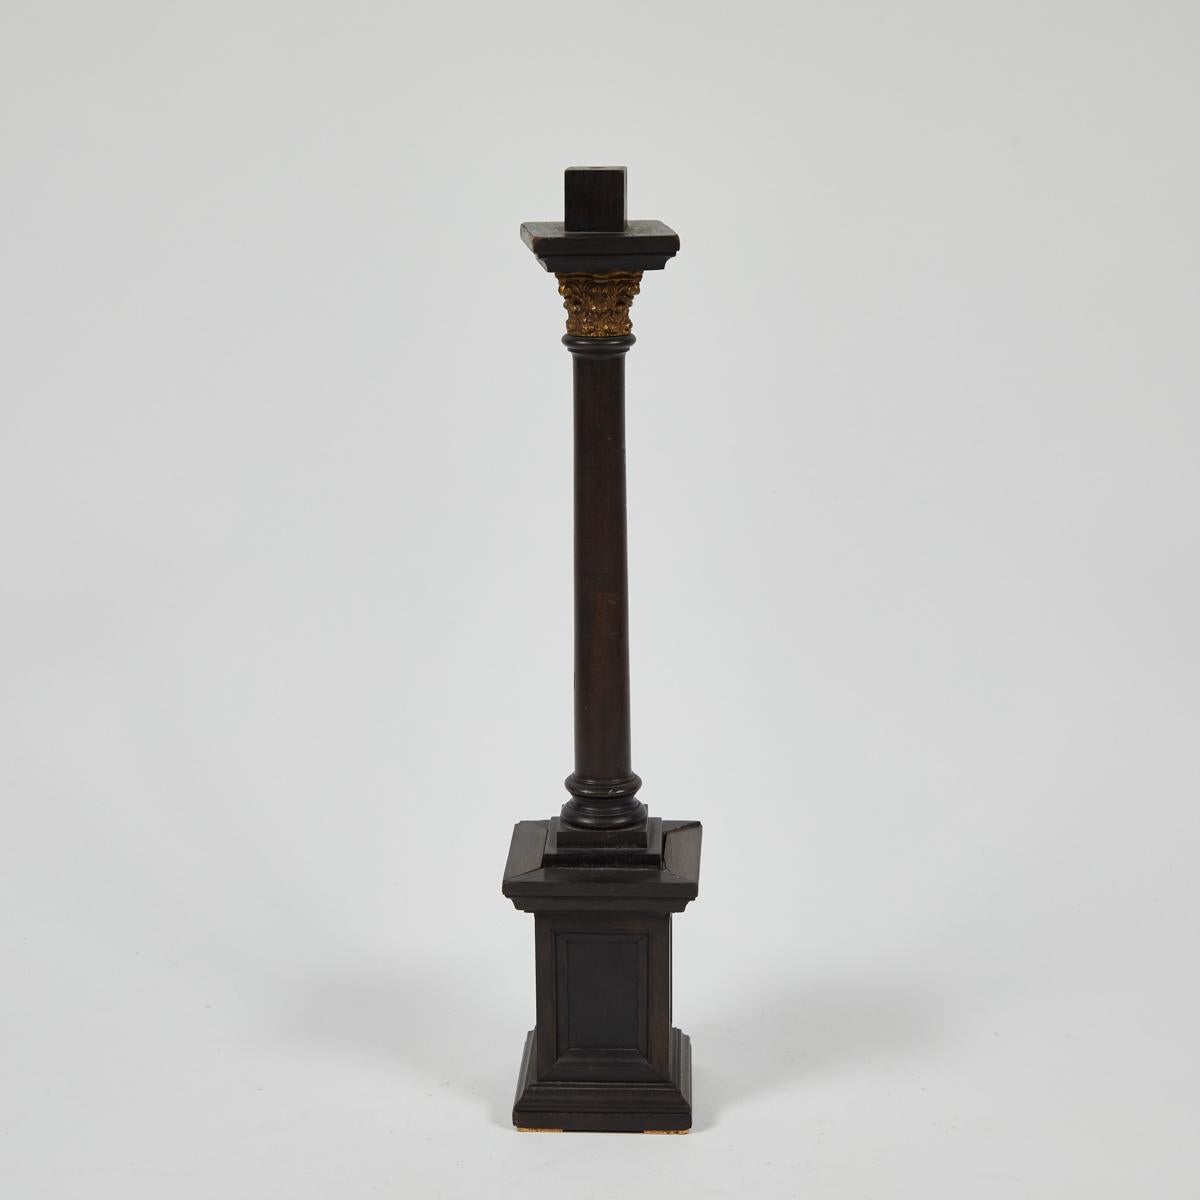 Late 19th-century neoclassical wooden column model from France. Exceptional handiwork has gone into this creation; the gilded Corinthian capital has been minutely carved and makes a wonderful contrast with the dark, smoothly buffed wood. An